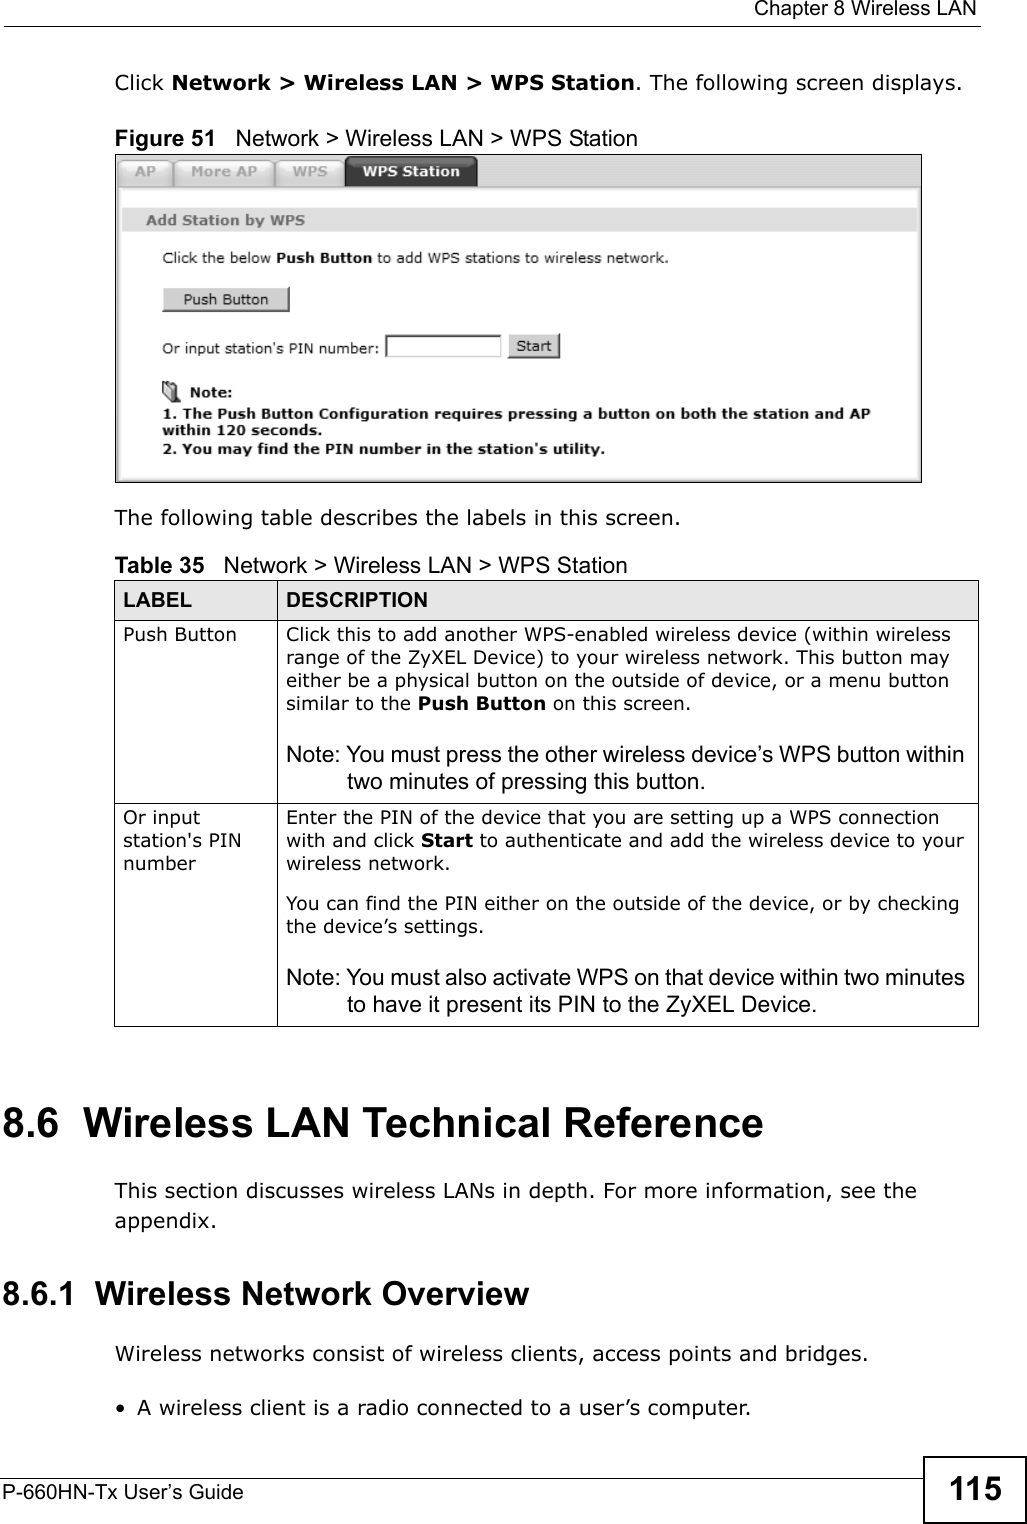  Chapter 8 Wireless LANP-660HN-Tx User’s Guide 115Click Network &gt; Wireless LAN &gt; WPS Station. The following screen displays.Figure 51   Network &gt; Wireless LAN &gt; WPS StationThe following table describes the labels in this screen.8.6  Wireless LAN Technical ReferenceThis section discusses wireless LANs in depth. For more information, see the appendix.8.6.1  Wireless Network OverviewWireless networks consist of wireless clients, access points and bridges. • A wireless client is a radio connected to a user’s computer. Table 35   Network &gt; Wireless LAN &gt; WPS StationLABEL DESCRIPTIONPush Button Click this to add another WPS-enabled wireless device (within wireless range of the ZyXEL Device) to your wireless network. This button may either be a physical button on the outside of device, or a menu button similar to the Push Button on this screen.Note: You must press the other wireless device’s WPS button within two minutes of pressing this button.Or input station&apos;s PIN numberEnter the PIN of the device that you are setting up a WPS connection with and click Start to authenticate and add the wireless device to your wireless network.You can find the PIN either on the outside of the device, or by checking the device’s settings.Note: You must also activate WPS on that device within two minutes to have it present its PIN to the ZyXEL Device.